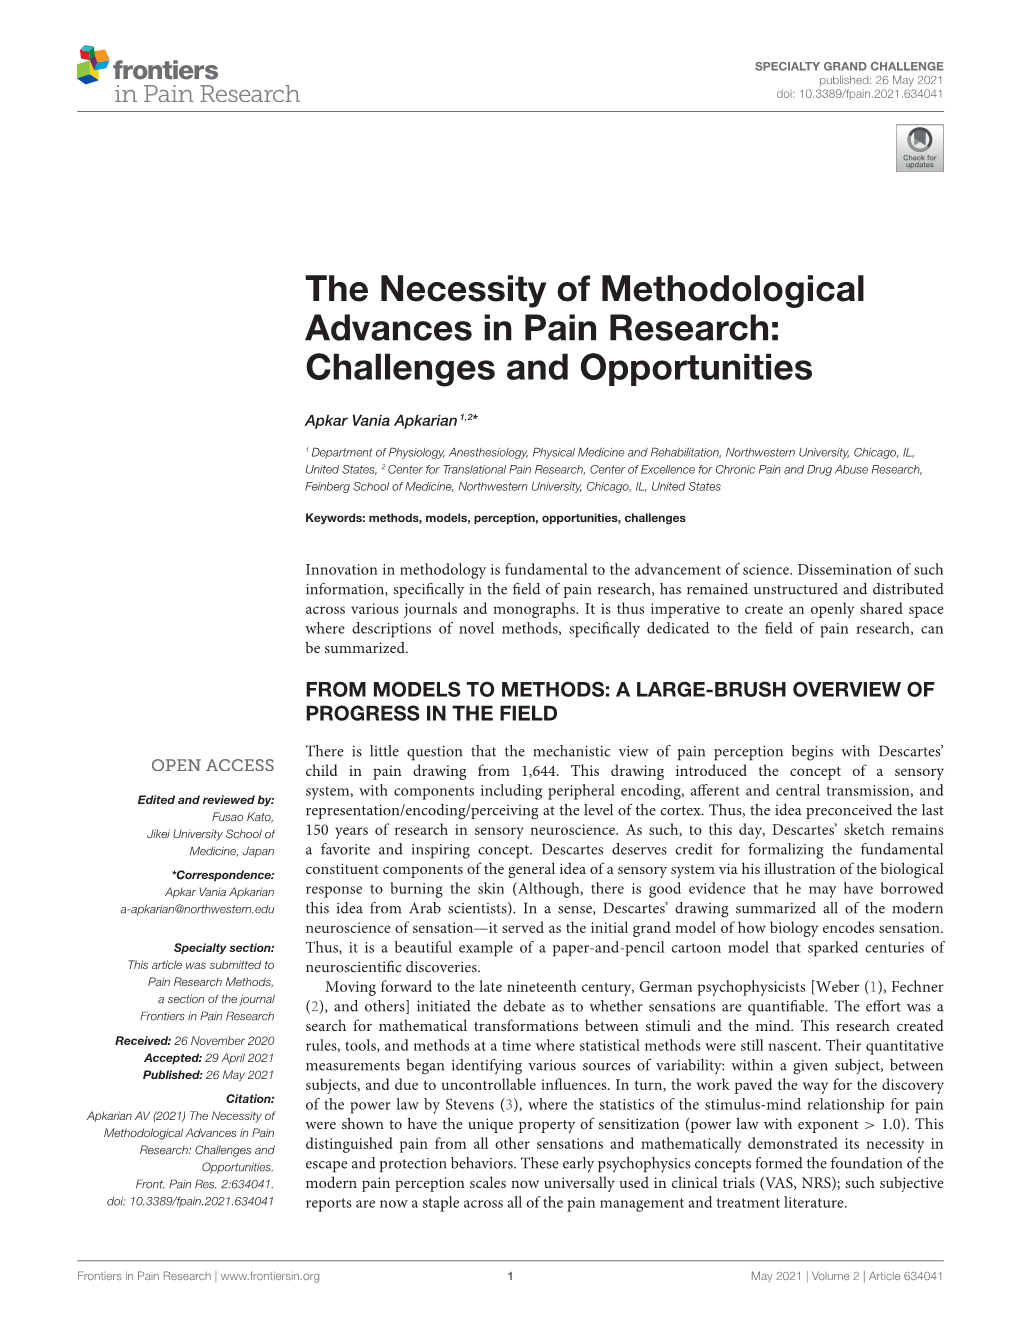 The Necessity of Methodological Advances in Pain Research: Challenges and Opportunities